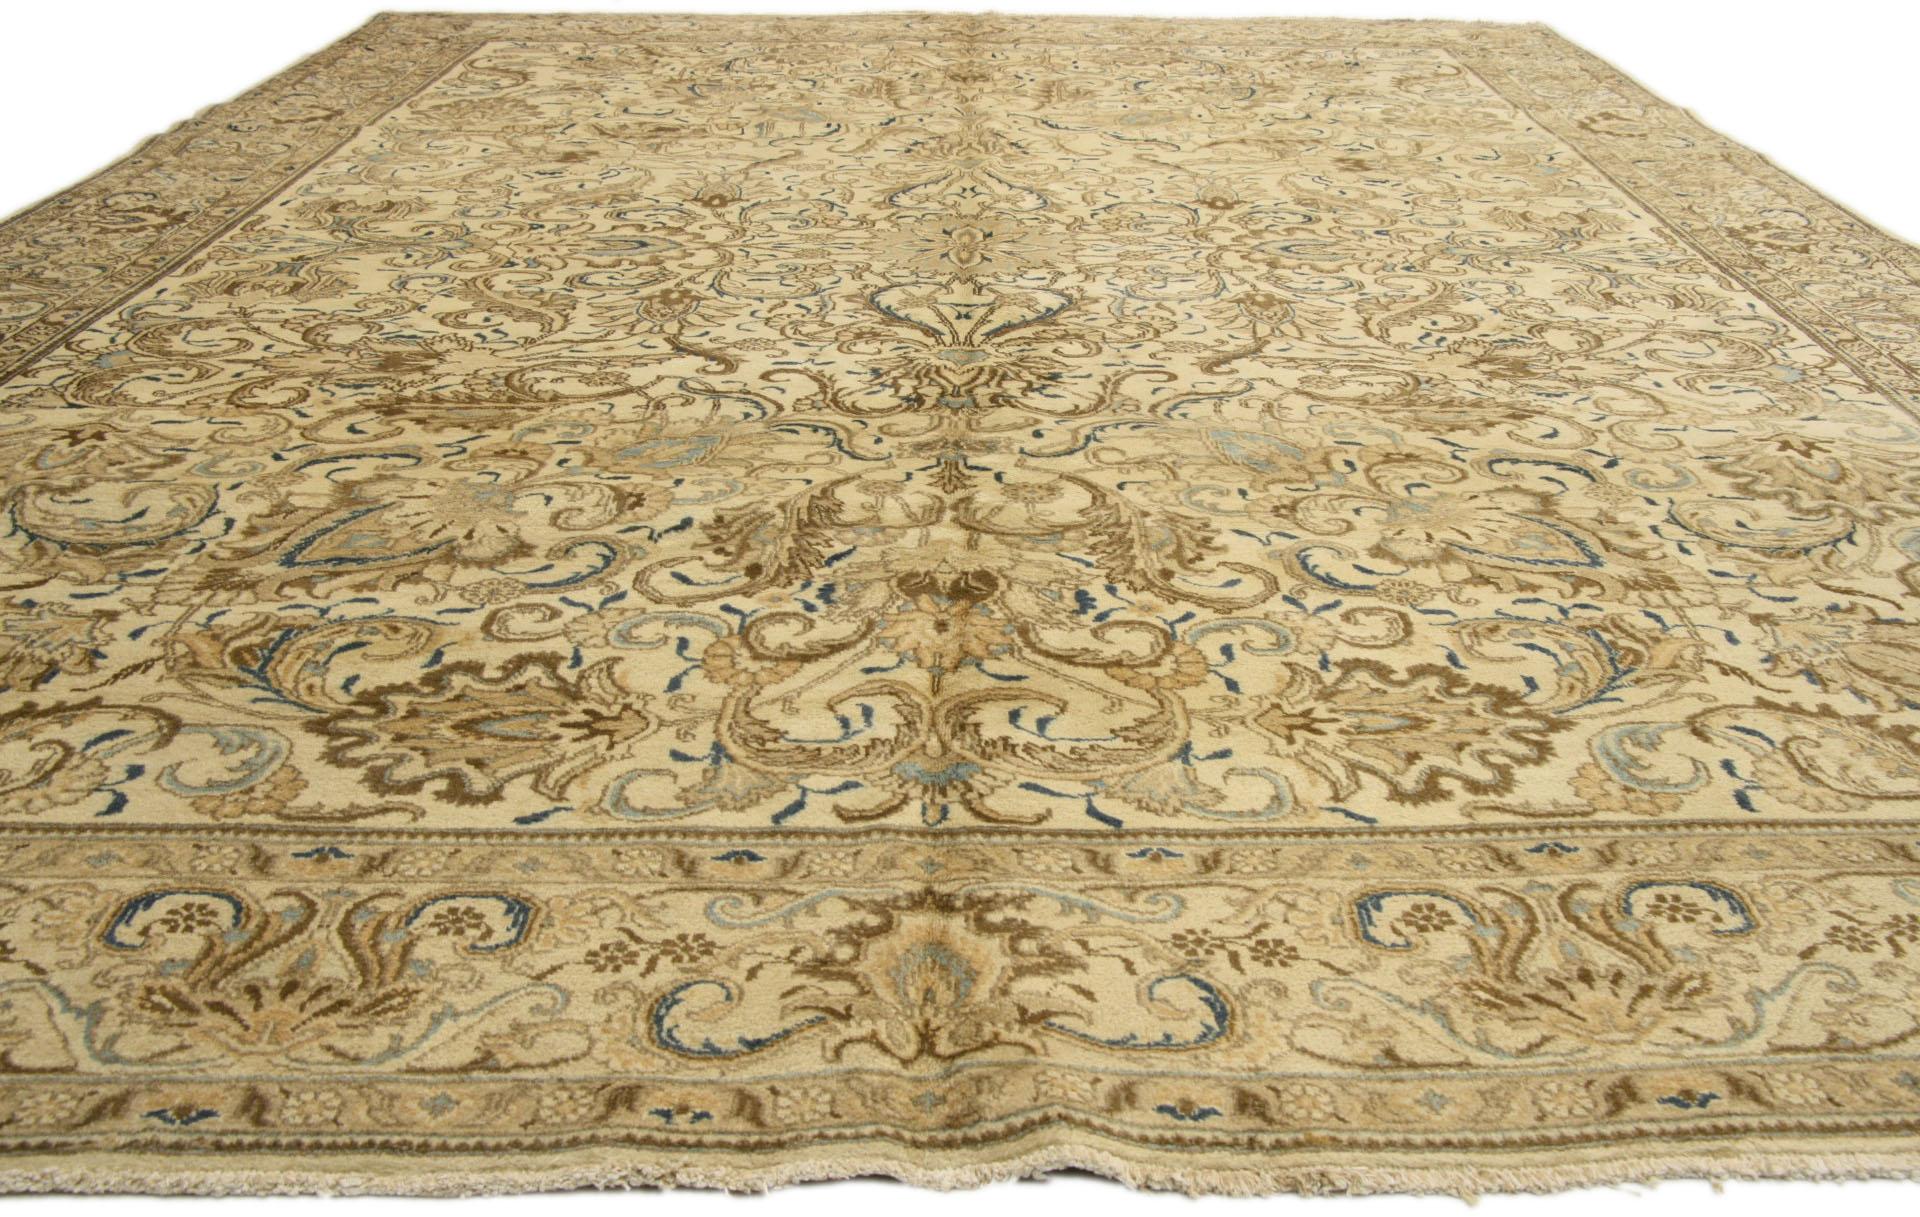 76357, vintage Persian Tabriz rug with Victorian style and light colors. A juxtaposition of the modern and traditional, this hand knotted wool vintage Persian Tabriz rug with Victorian style features an all-over floral pattern. As if rendered in